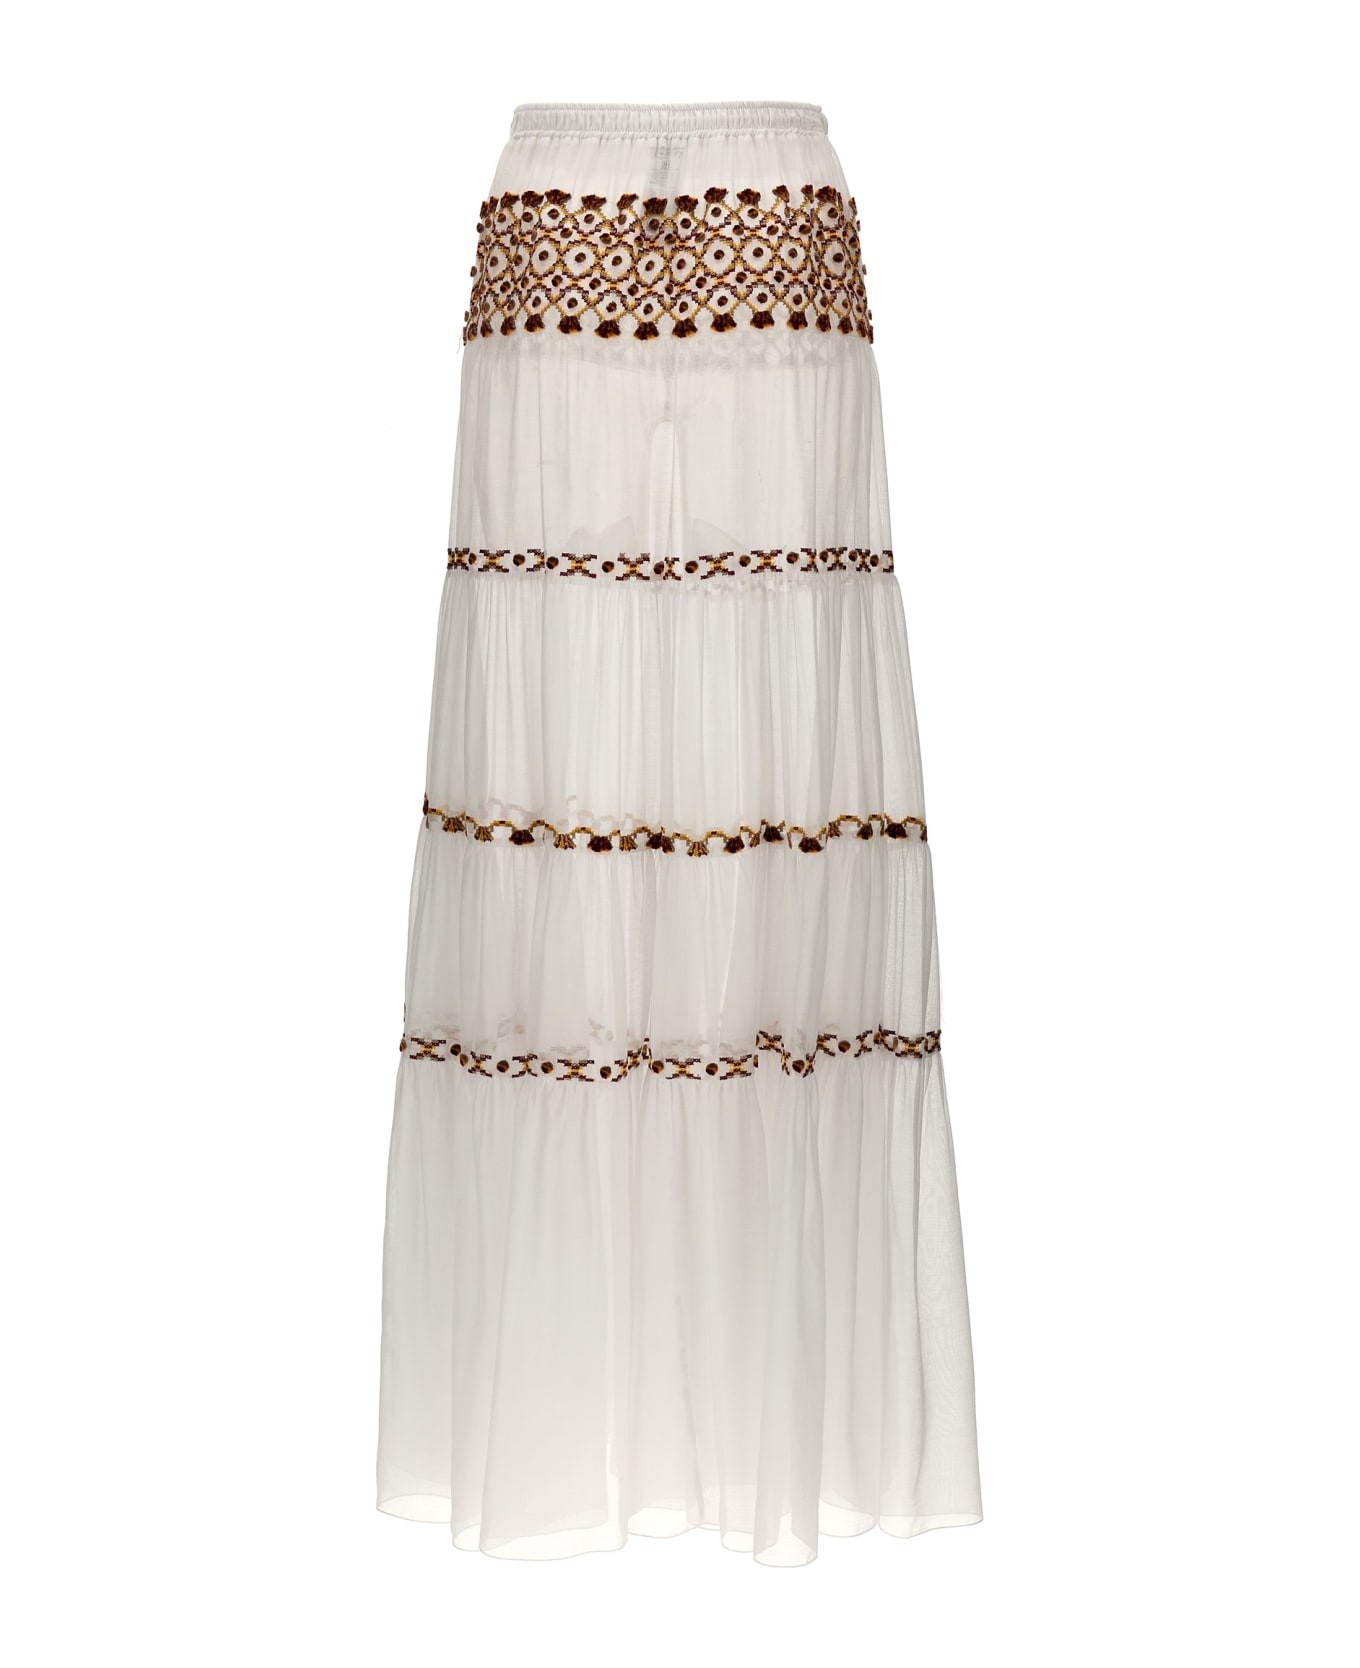 Ermanno Scervino Long Embroidery Skirt - White スカート